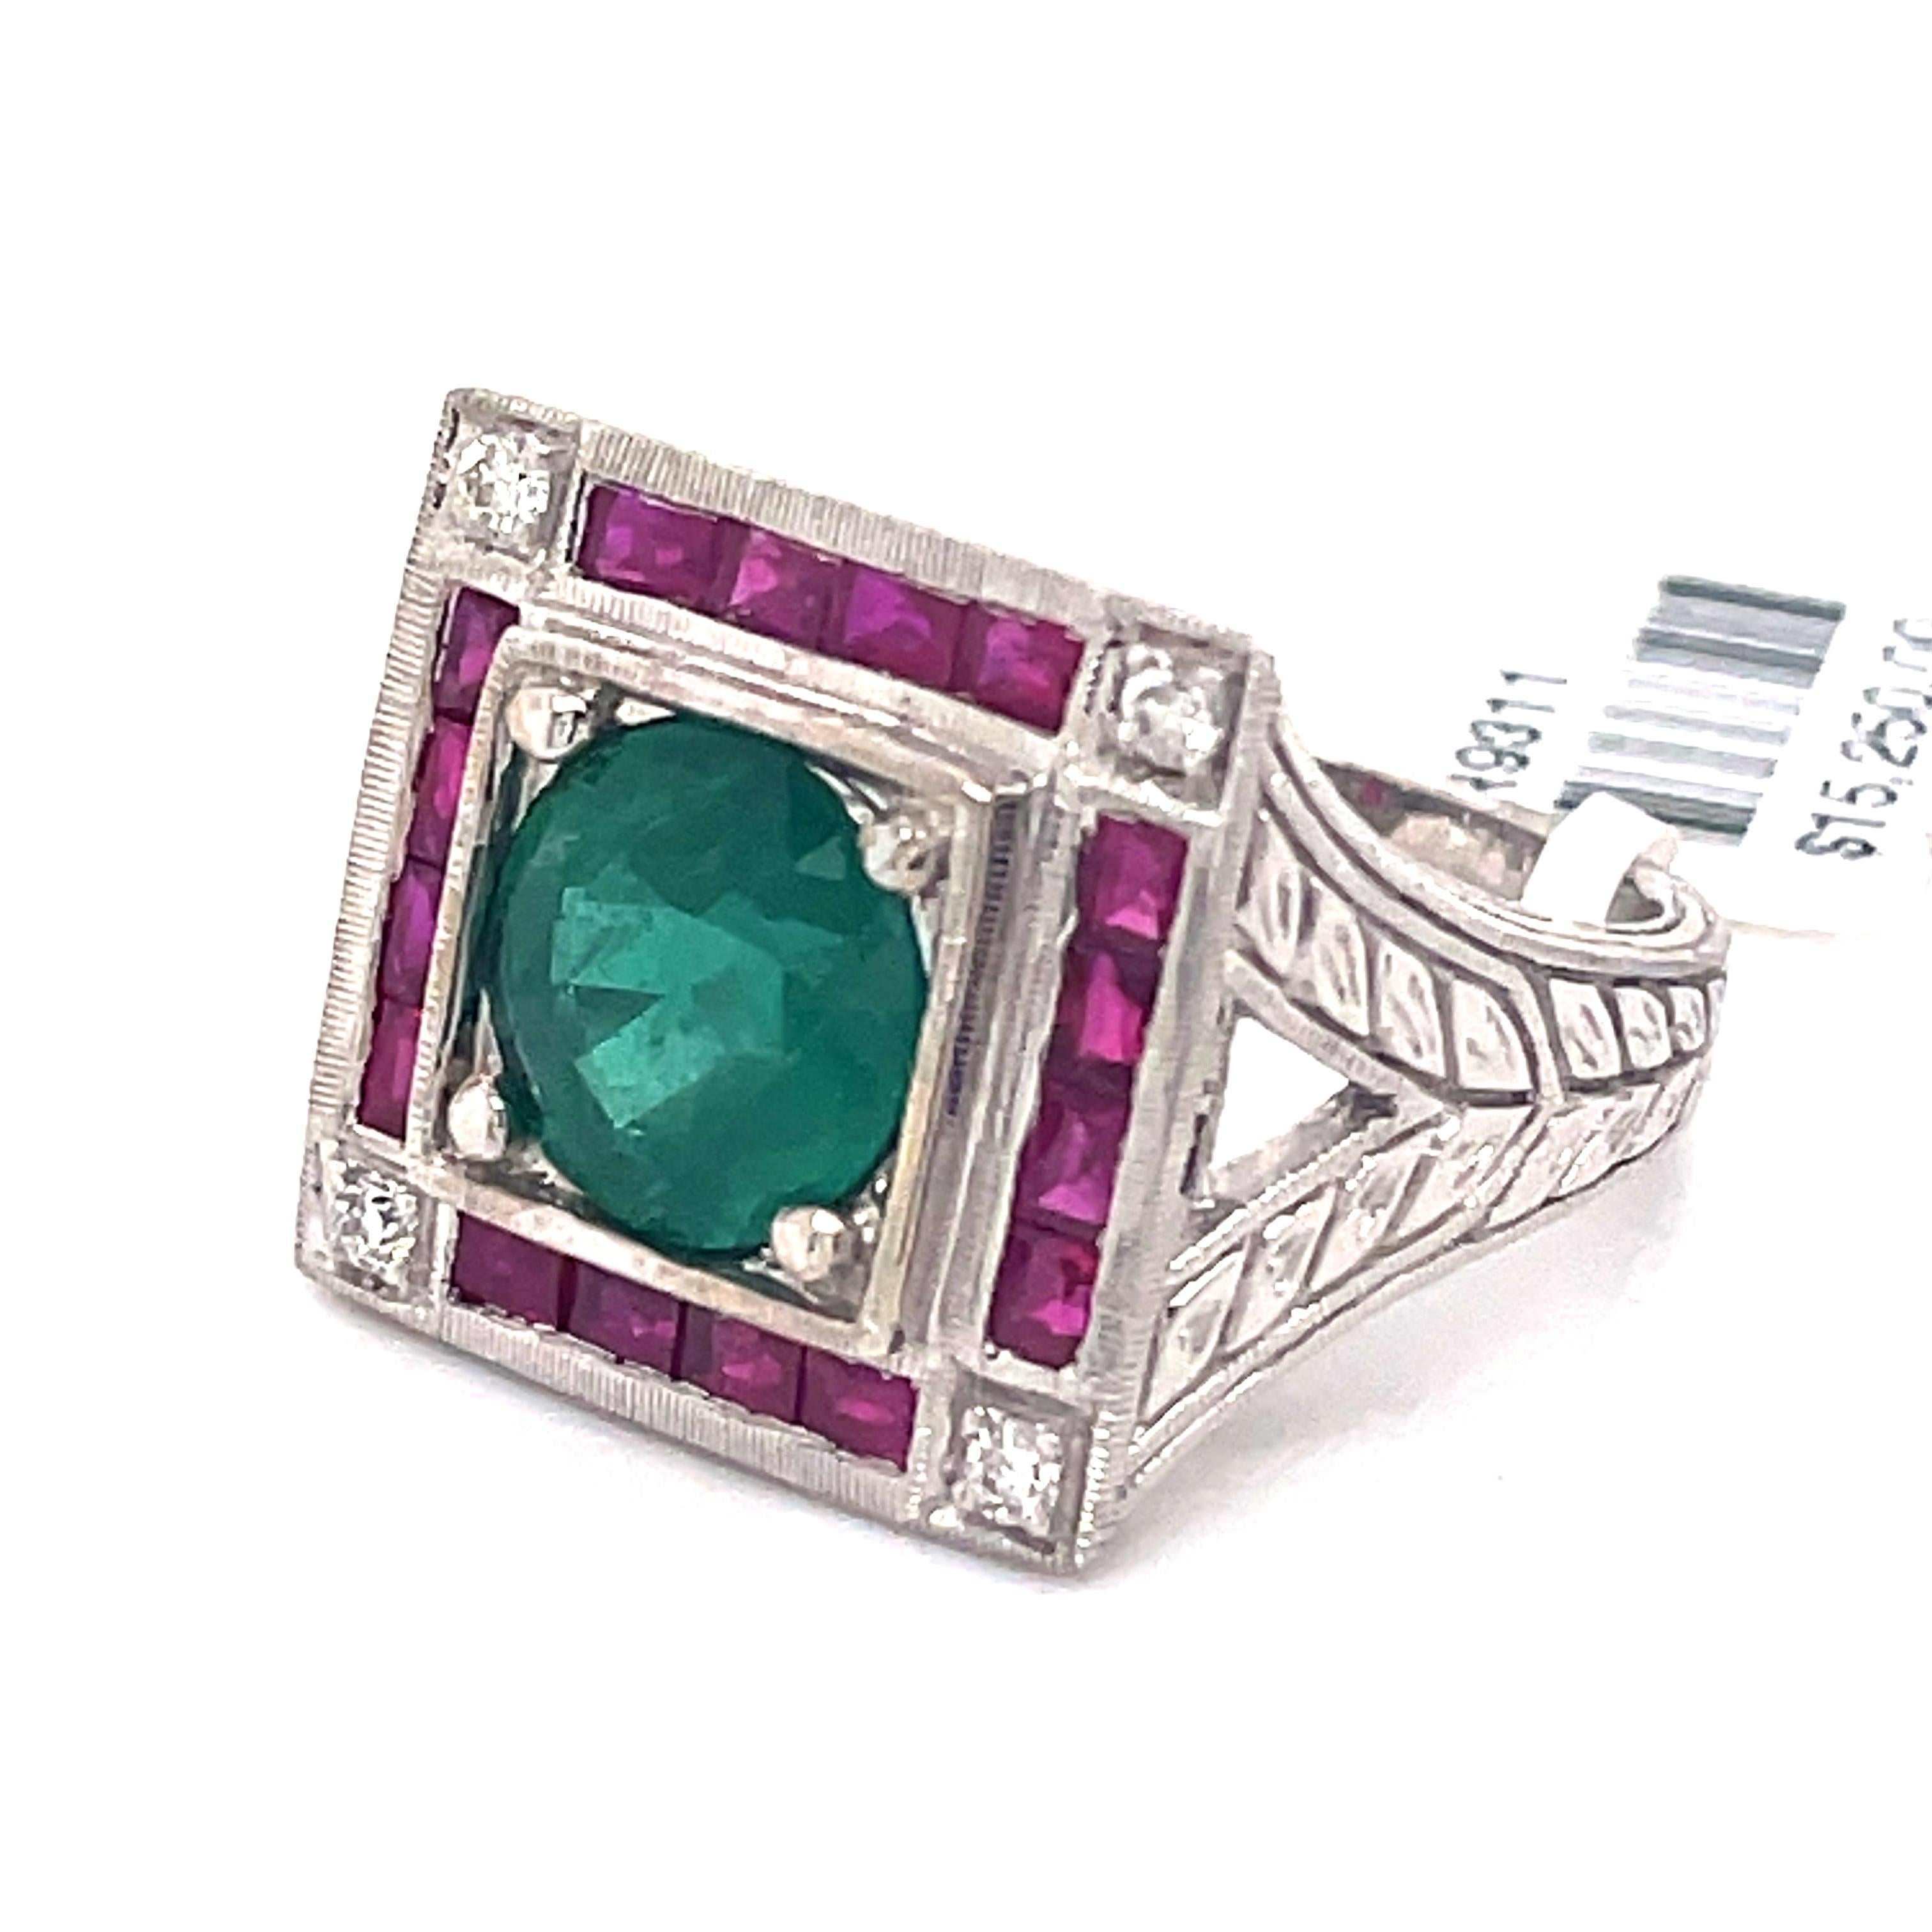 Round Cut Art Deco Style 2.15 Carat Emerald with Rubies & Diamonds Ring 18k White Gold For Sale